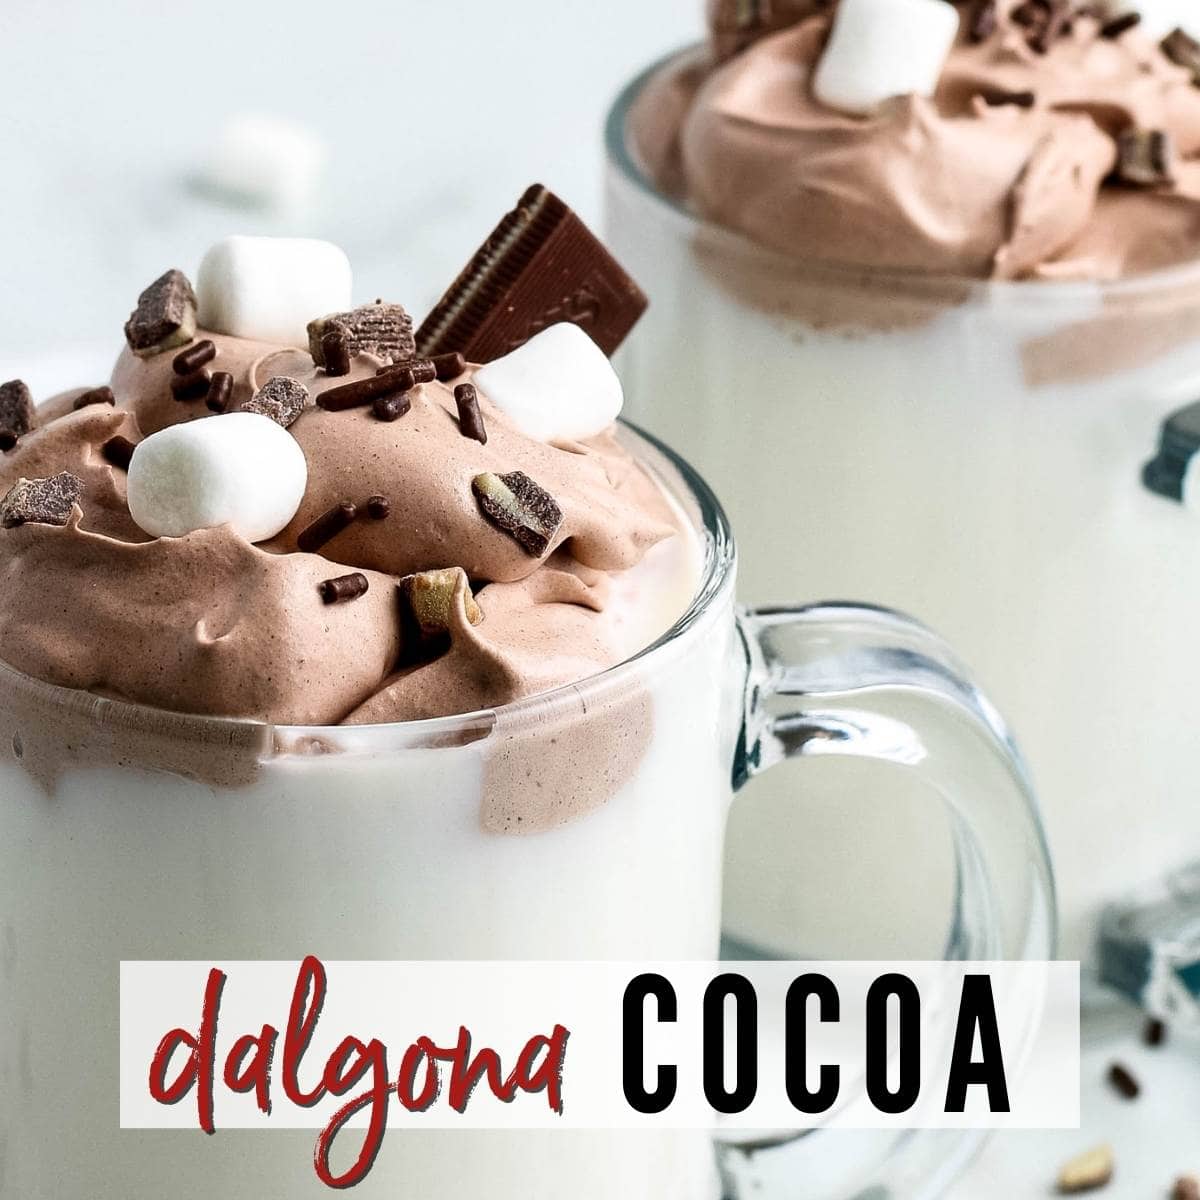 Two mugs of Dalgona whipped cocoa garnished with jimmies & marshmallows with a graphic overlay